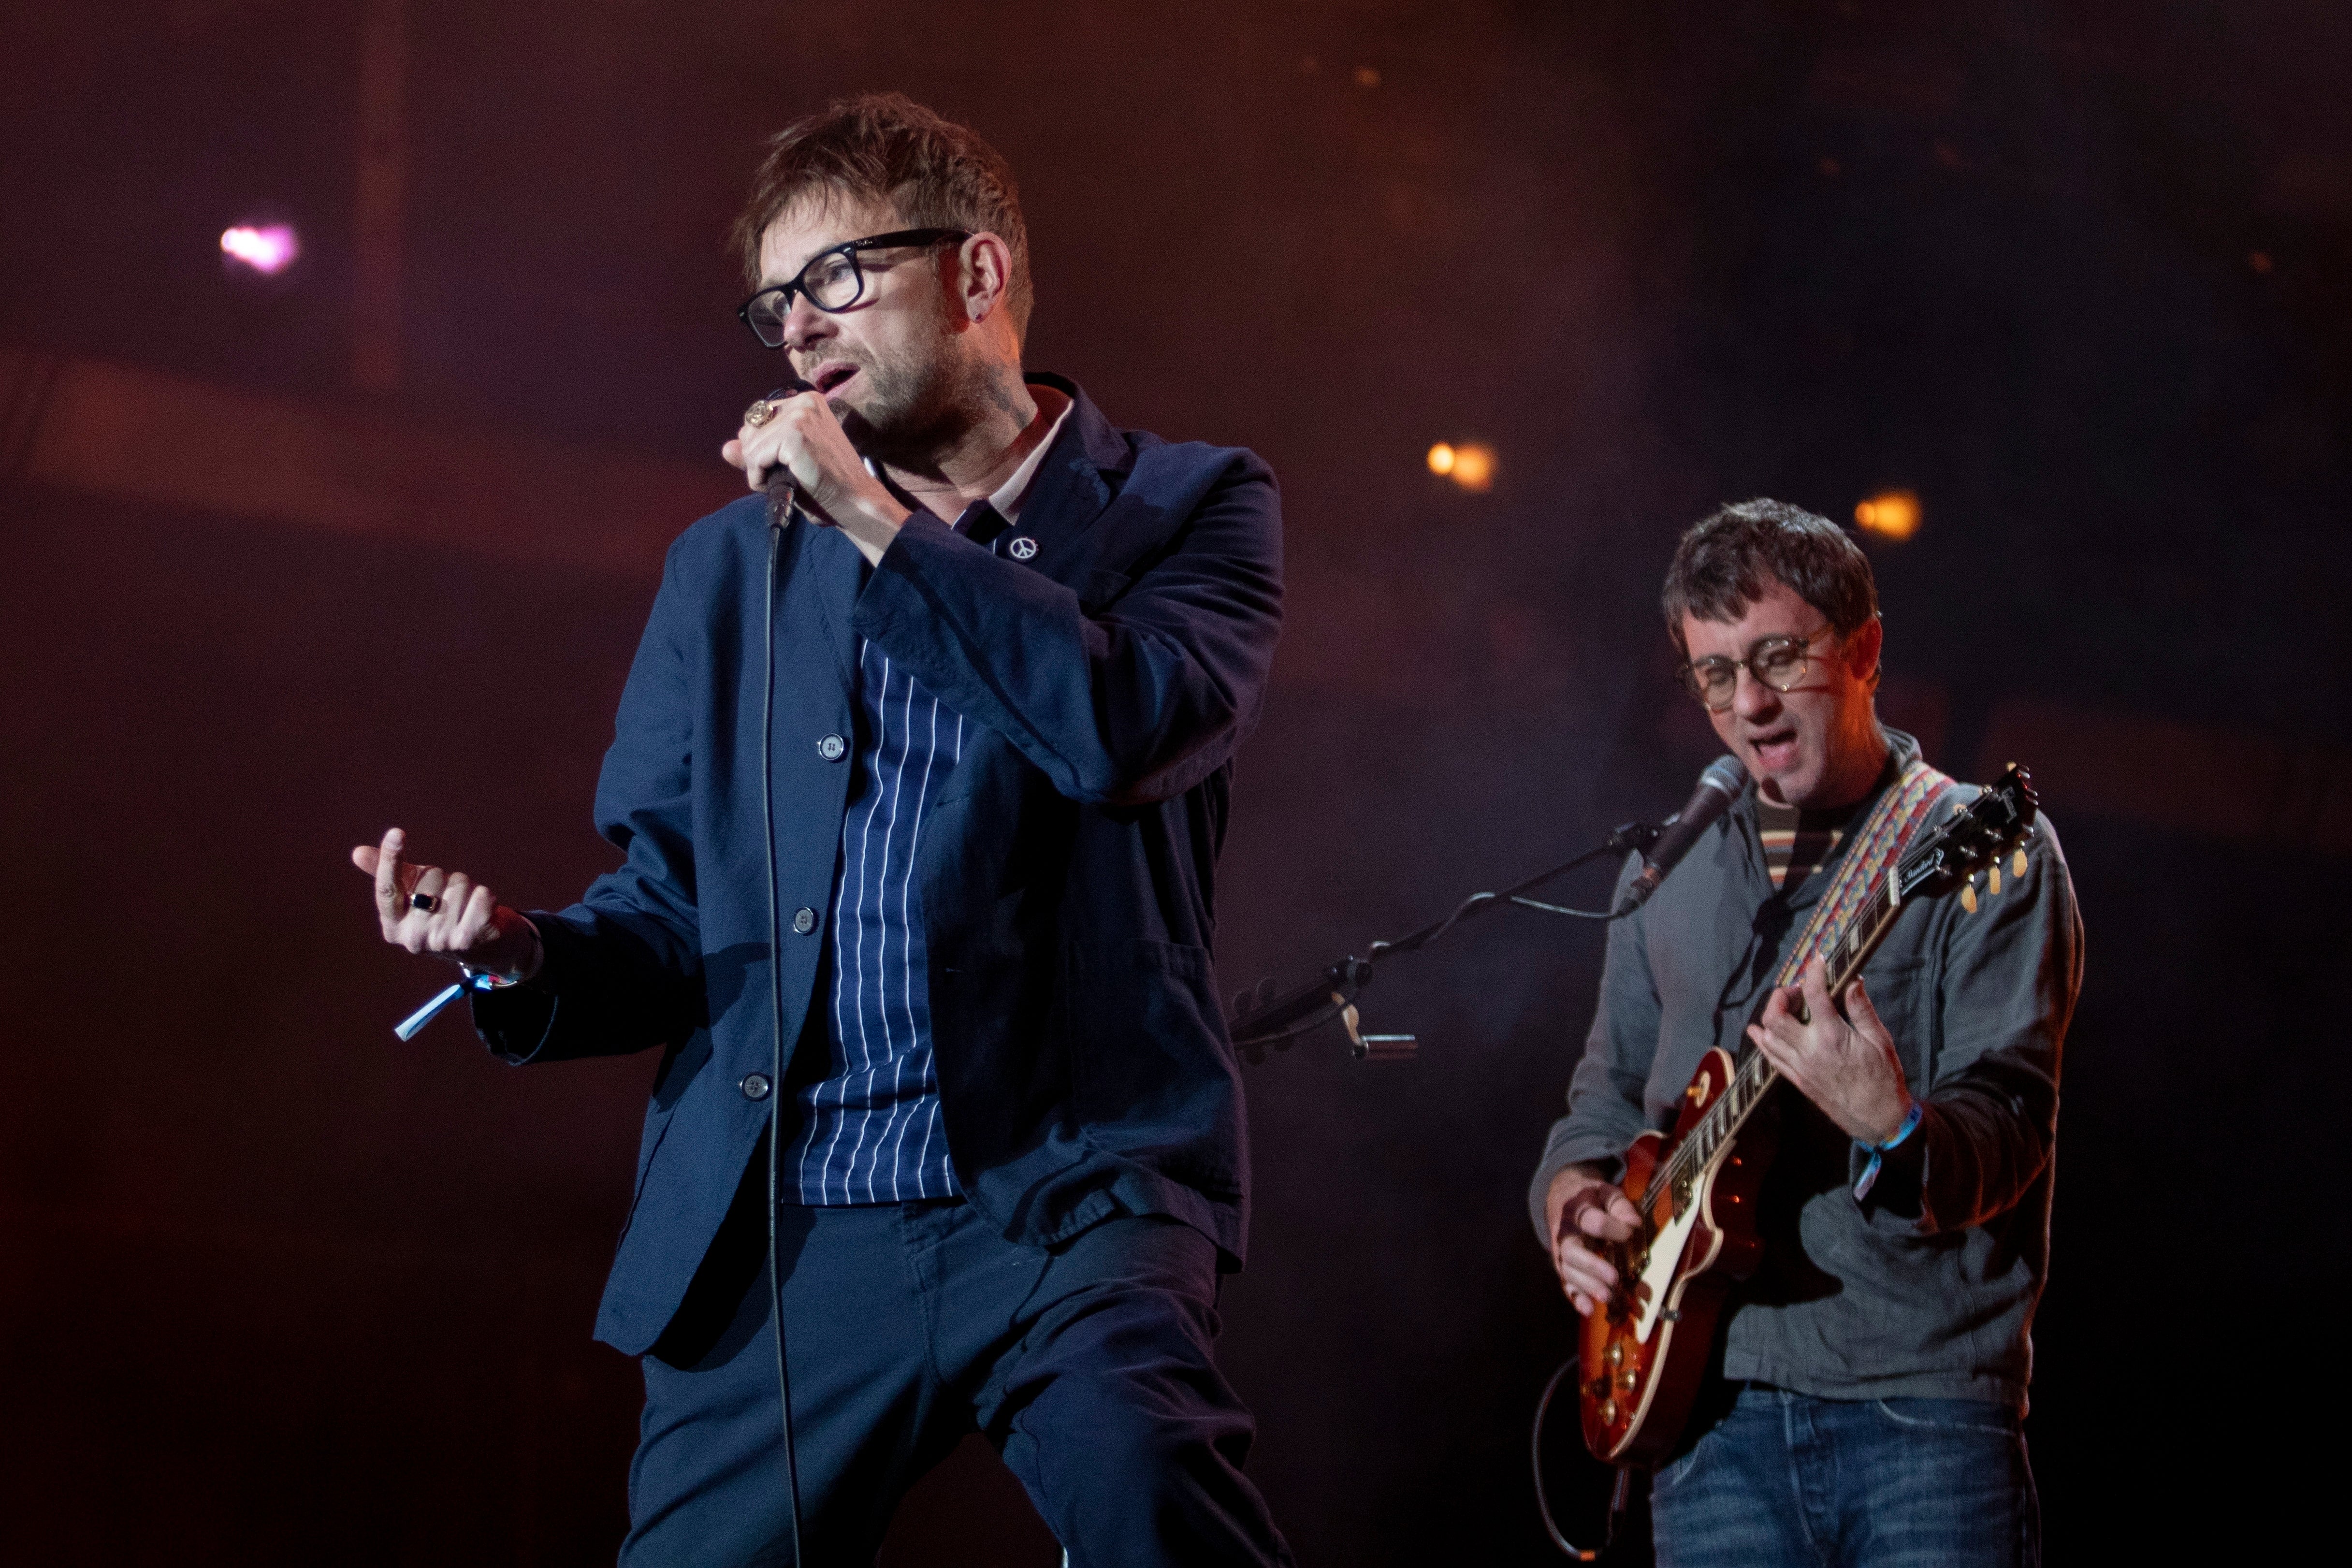 Blur are up for Best Rock Act